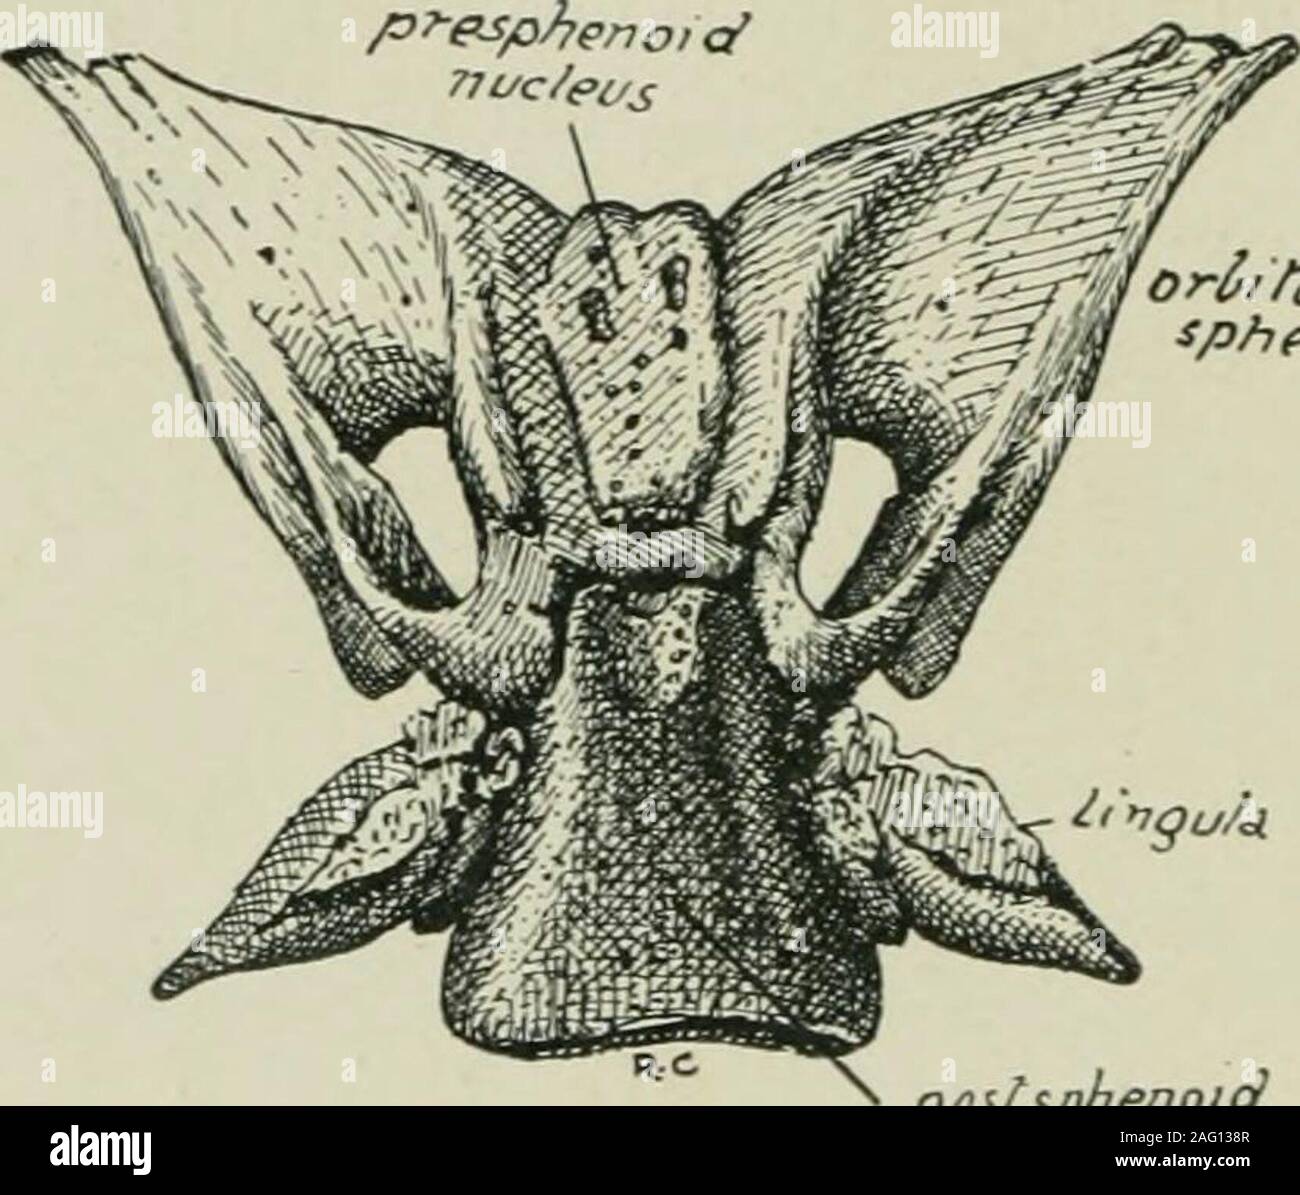 . Journal of anatomy. shape. Along each side of the post-sphenoid area the bone is formedfrom the lingulal centres. Each lingulal centre leads to the formation ofVOL. LI. (third SER. VOL. XII.)—JAN. 1917. 9 128 Dr V. Zachary Cope a triangular portion of bone with a small base posteriorly (correspondingto groove for the internal carotid artery) and a thin tapering portion whichends in an acute angle opposite the posterior end of the pre-sphenoid. Themajor part of the lateral aspect of the pre-sphenoid is in contact with thebone formed from the great wing of the sphenoid. The lingulal areaunites Stock Photo